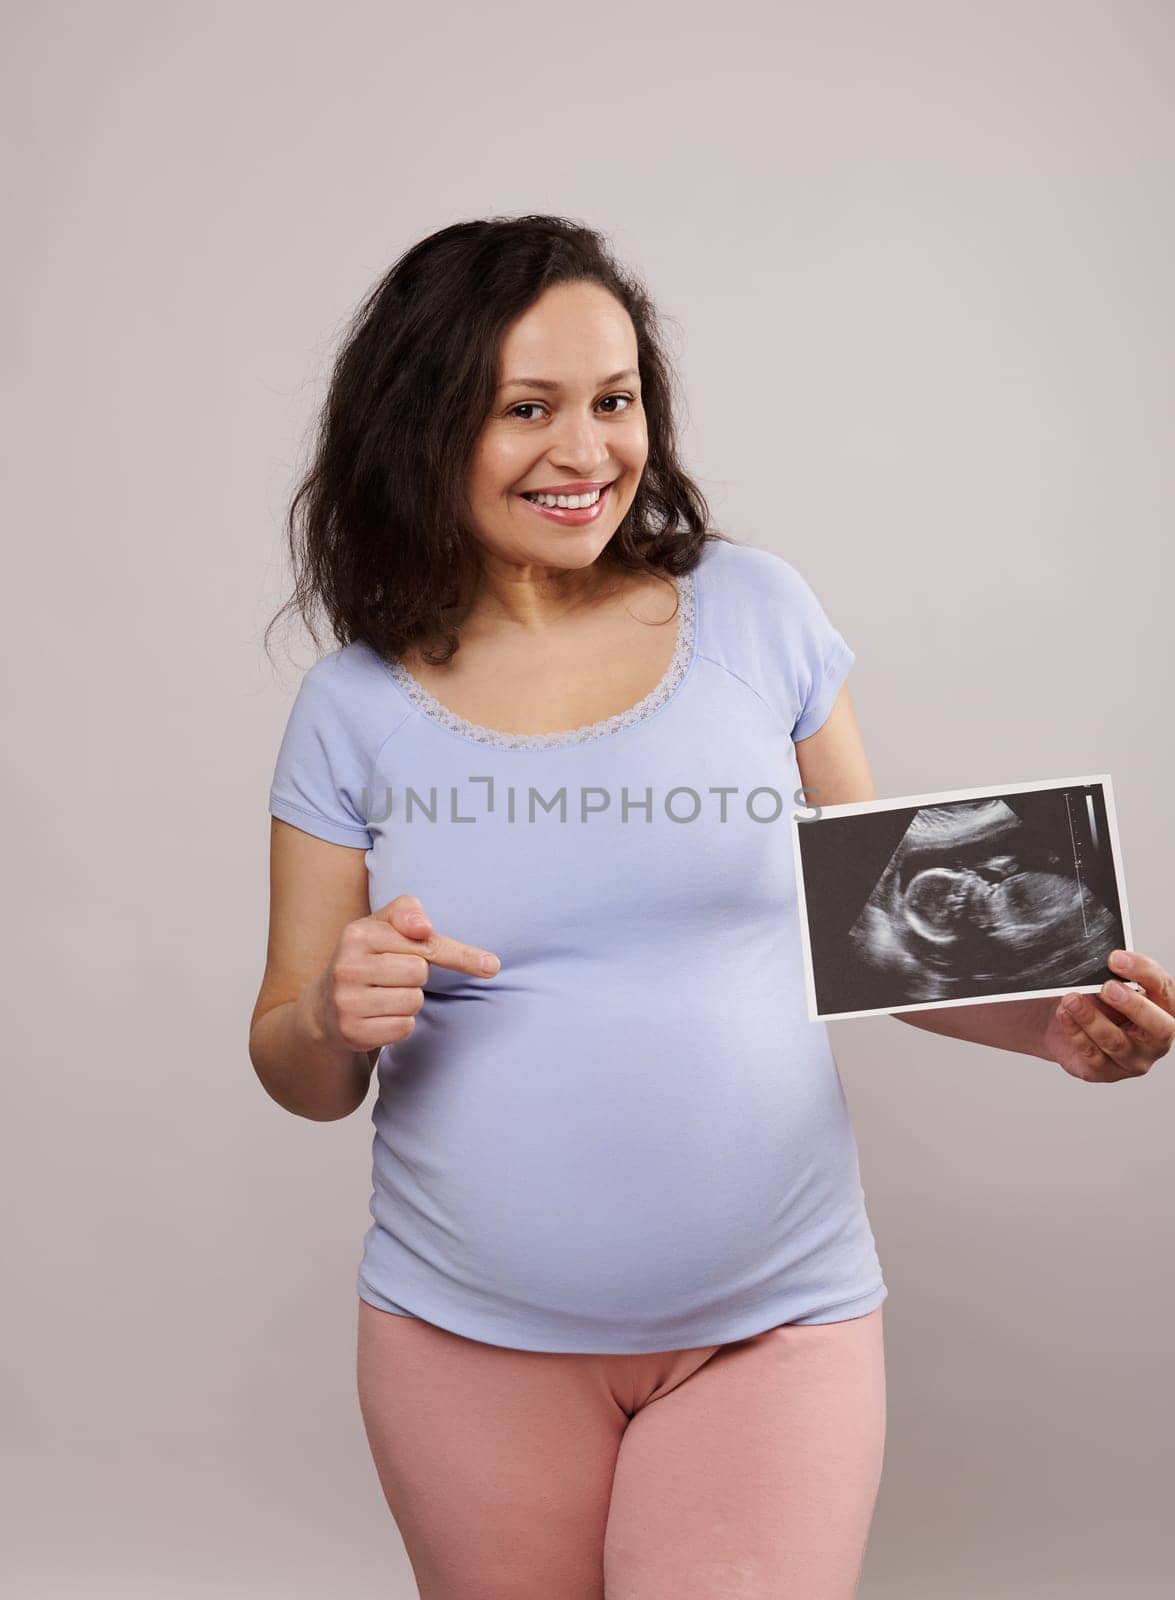 Smiling pregnant woman showing her newborn baby sonography to the camera and pointing at her belly, isolated on white by artgf